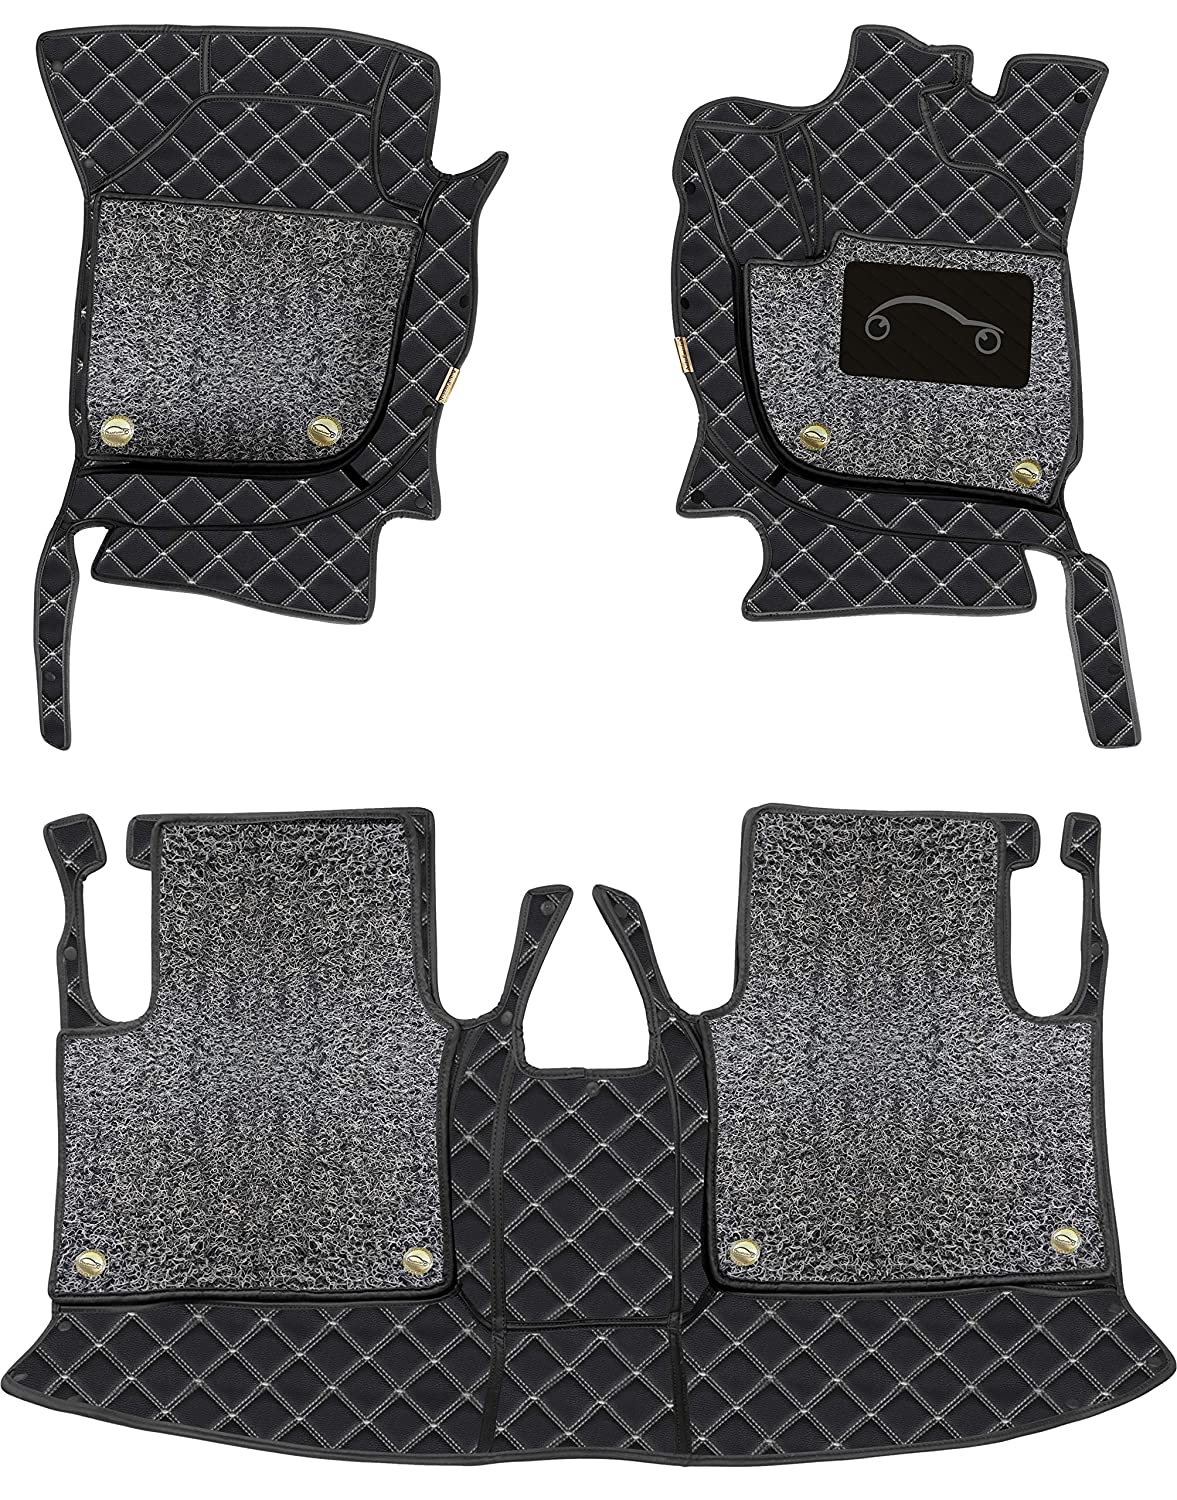 Mercedes A-Class Limousine AMG 2021 7D Luxury Car Mat, All Weather Proof, Anti-Skid, 100% Waterproof & Odorless with Unique Diamond Fish Design (24mm Luxury PU Leather, 2 Rows)